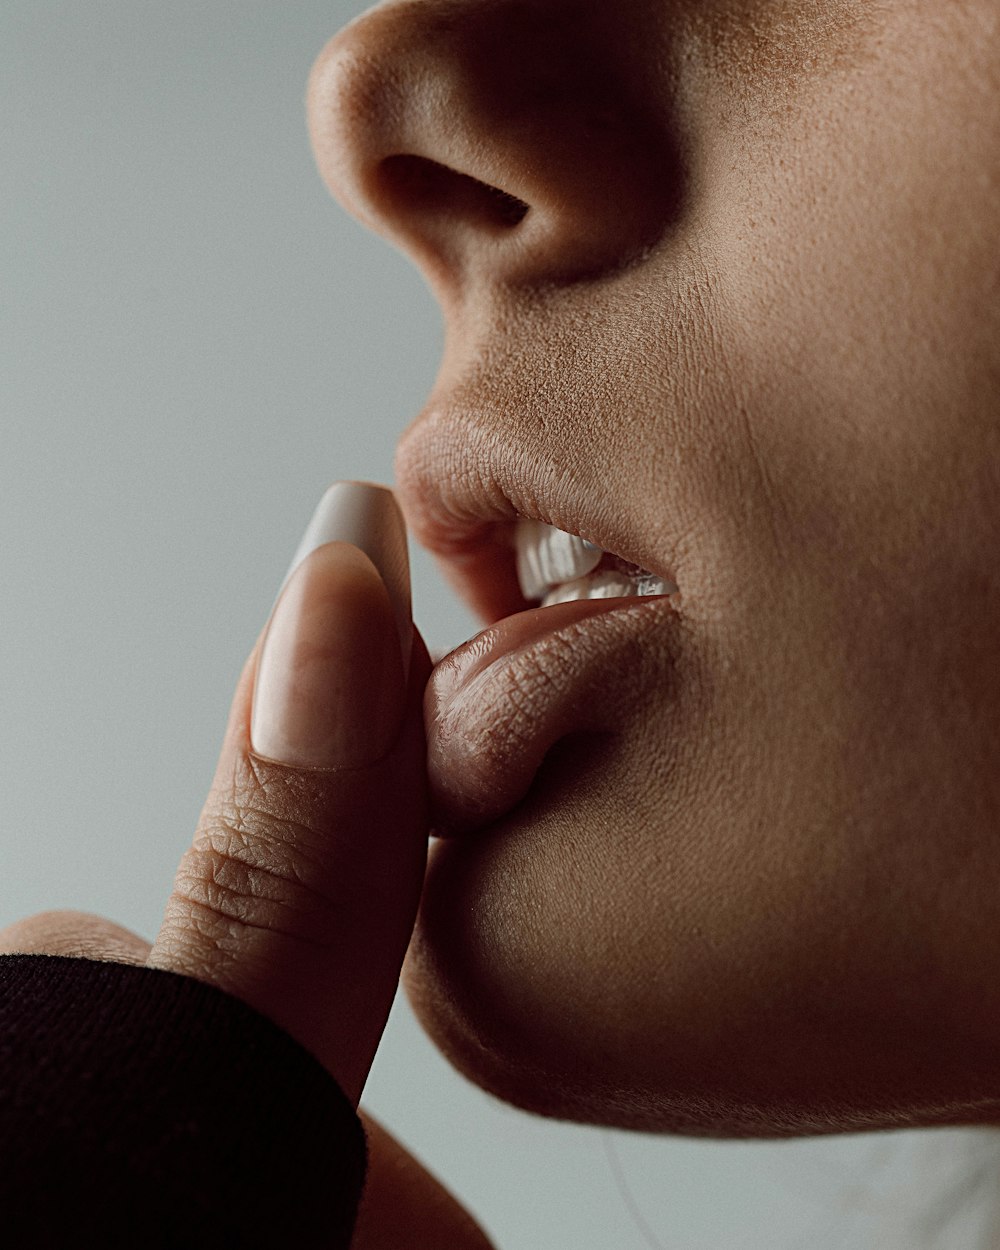 a close up of a person putting something in their mouth